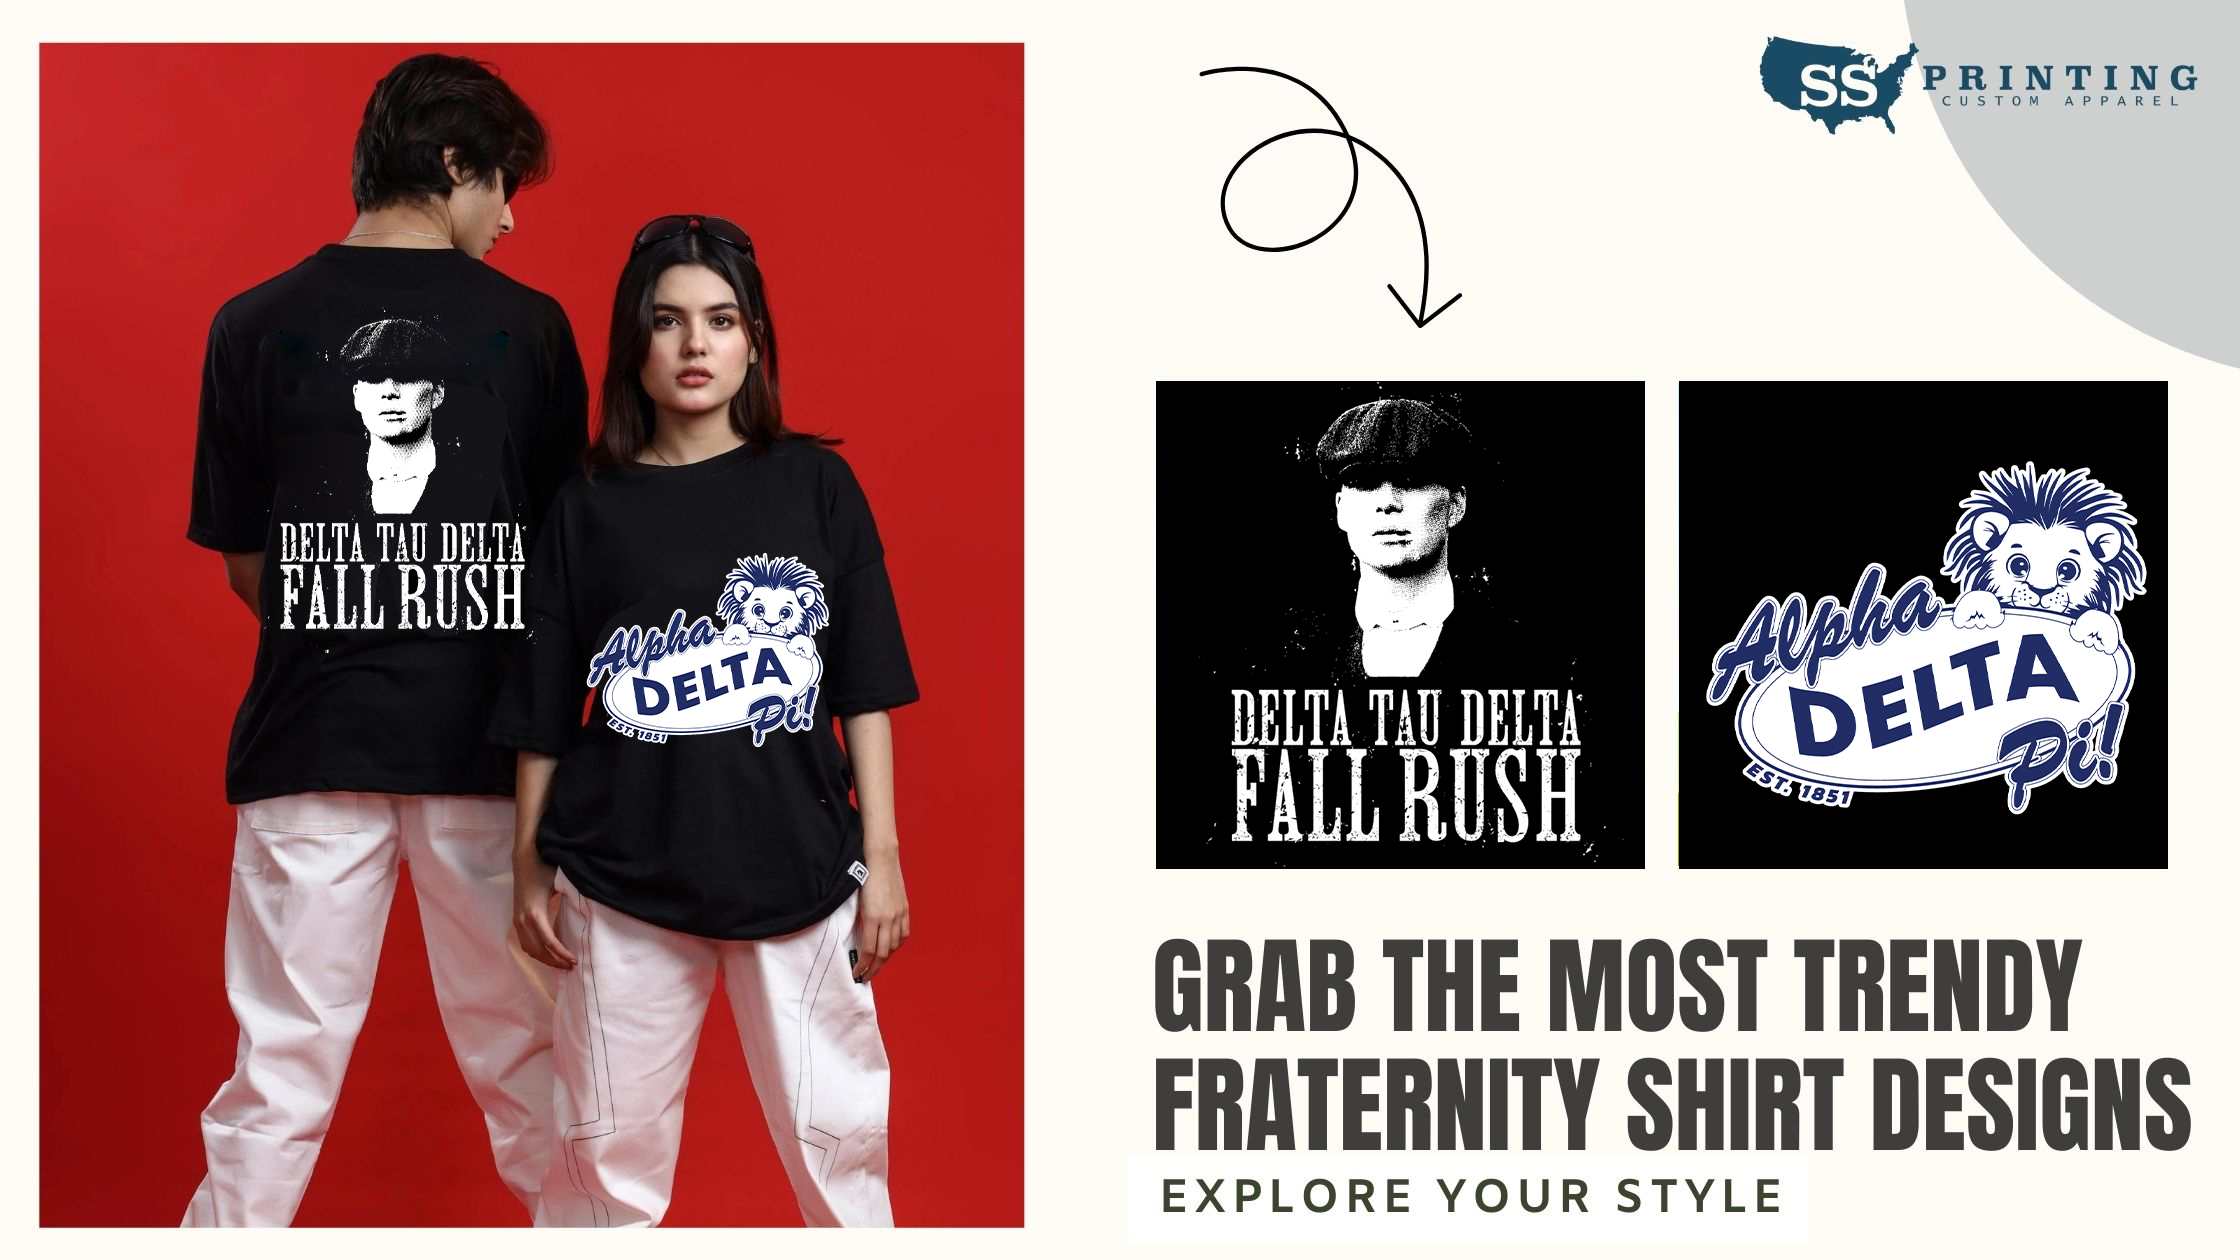 Grab the Trendiest Fraternity Shirt Designs| Explore Your Style